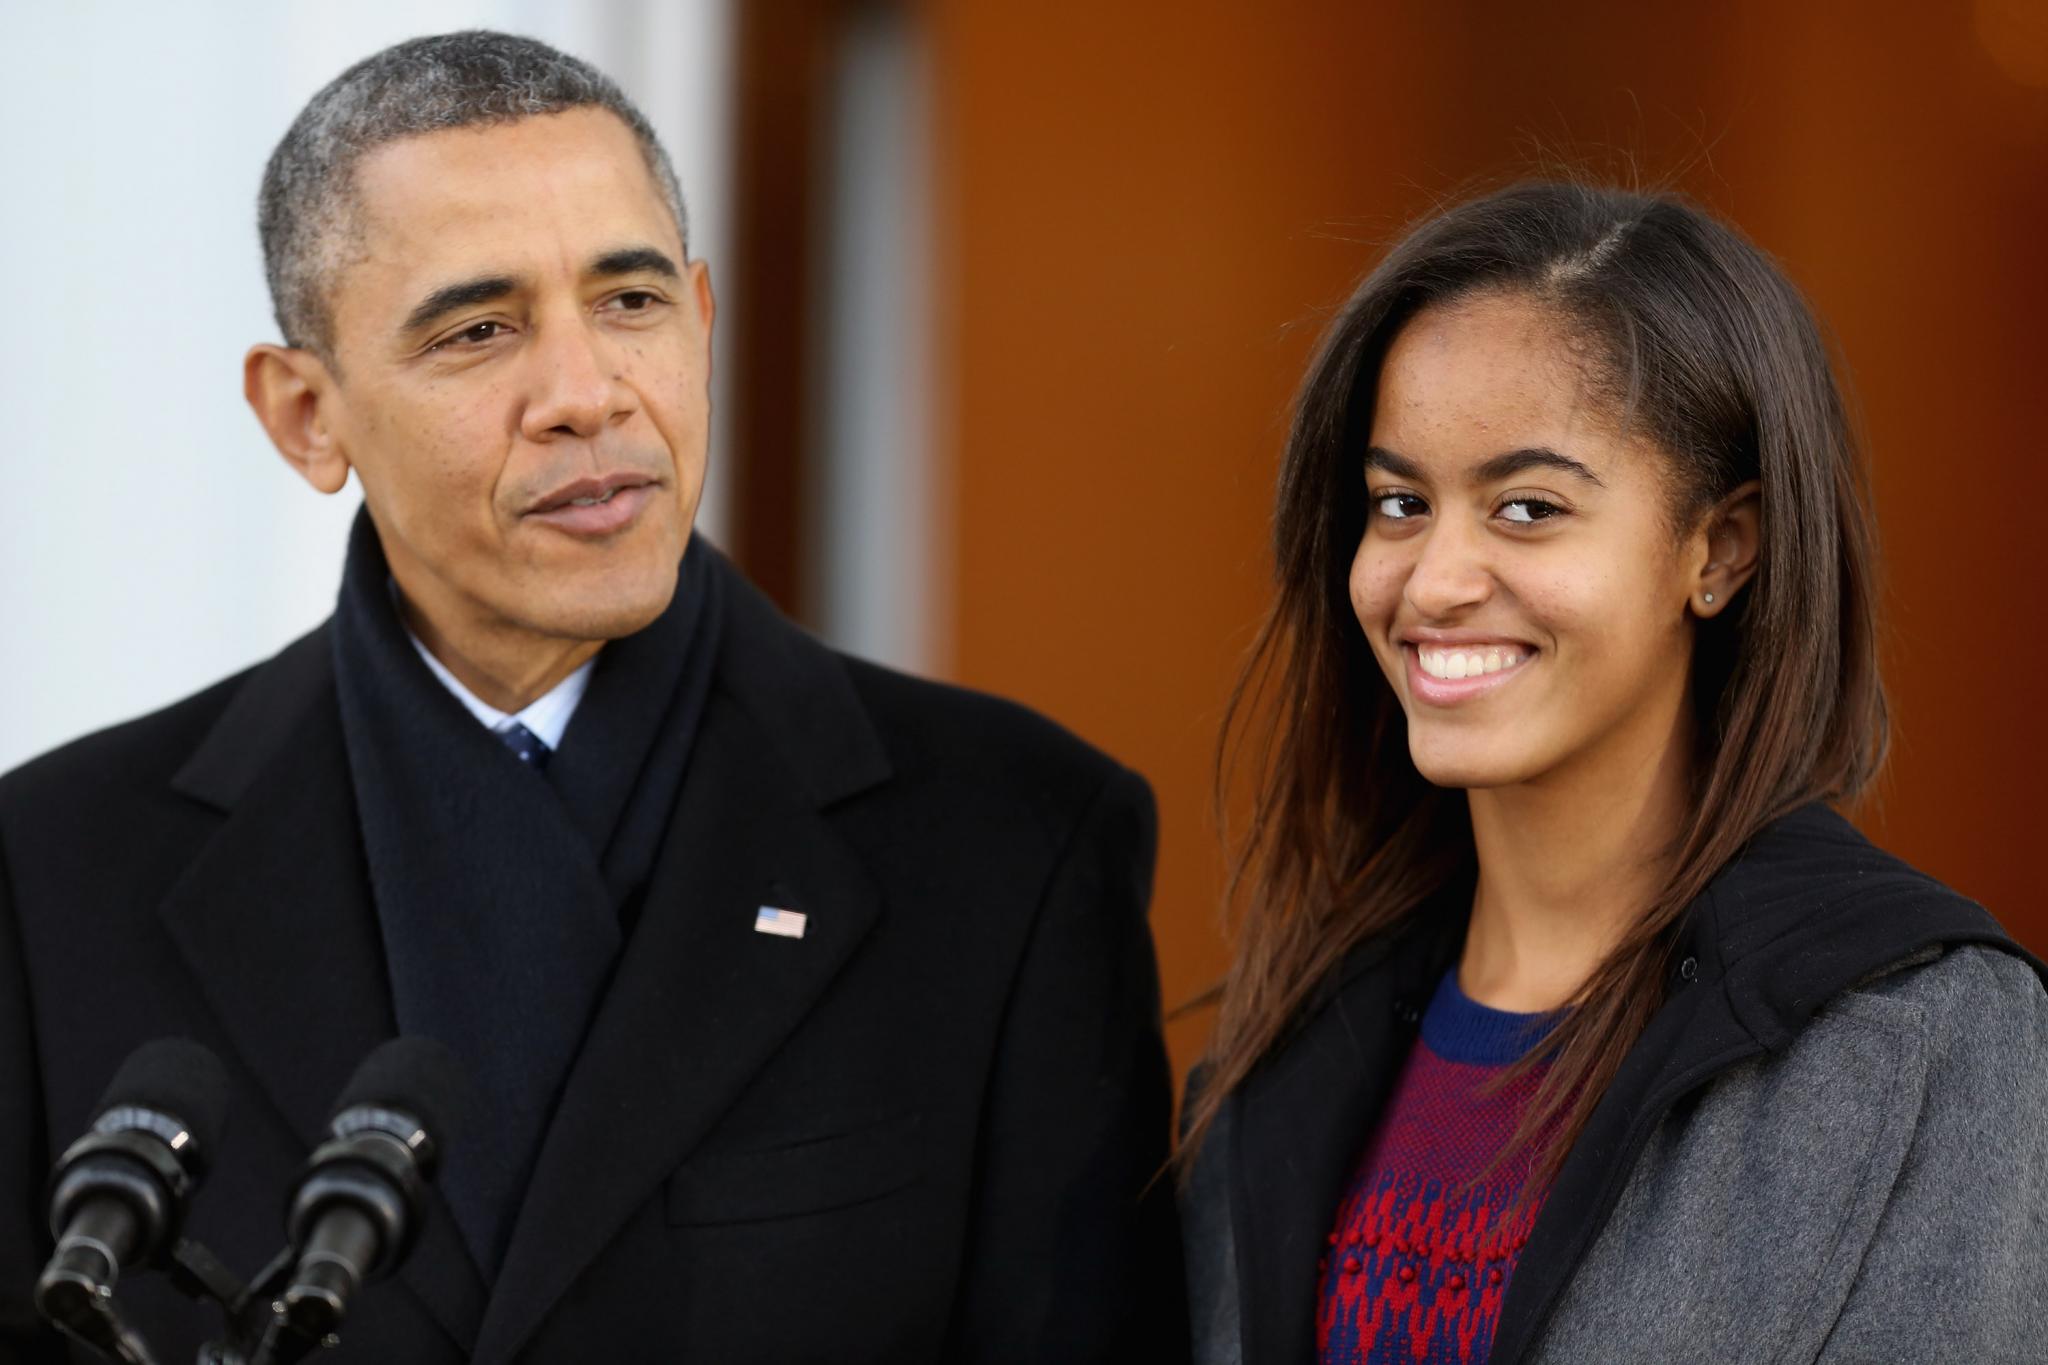 Brown University Apologizes to Malia Obama After Beer Pong Pics Go Viral